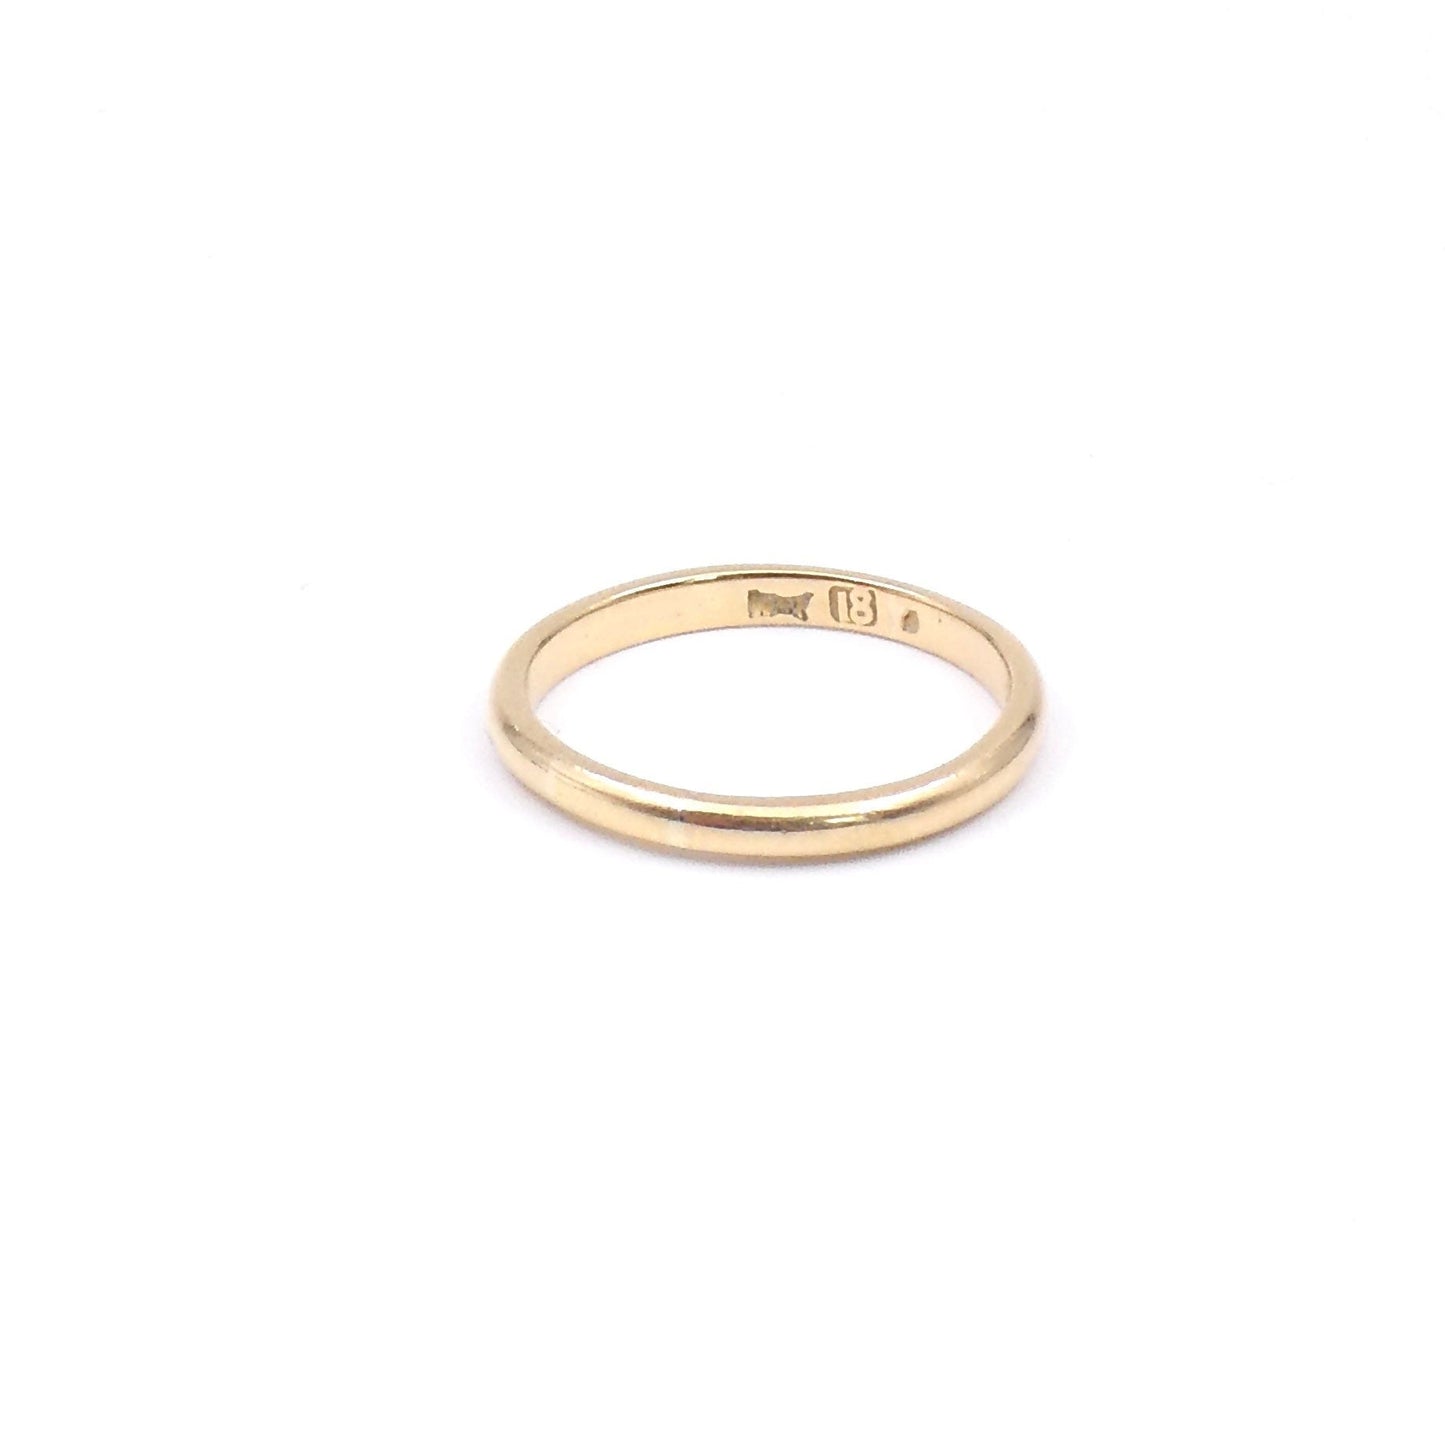 Vintage band, 18kt yellow gold wedding ring or vintage ring. - Collected